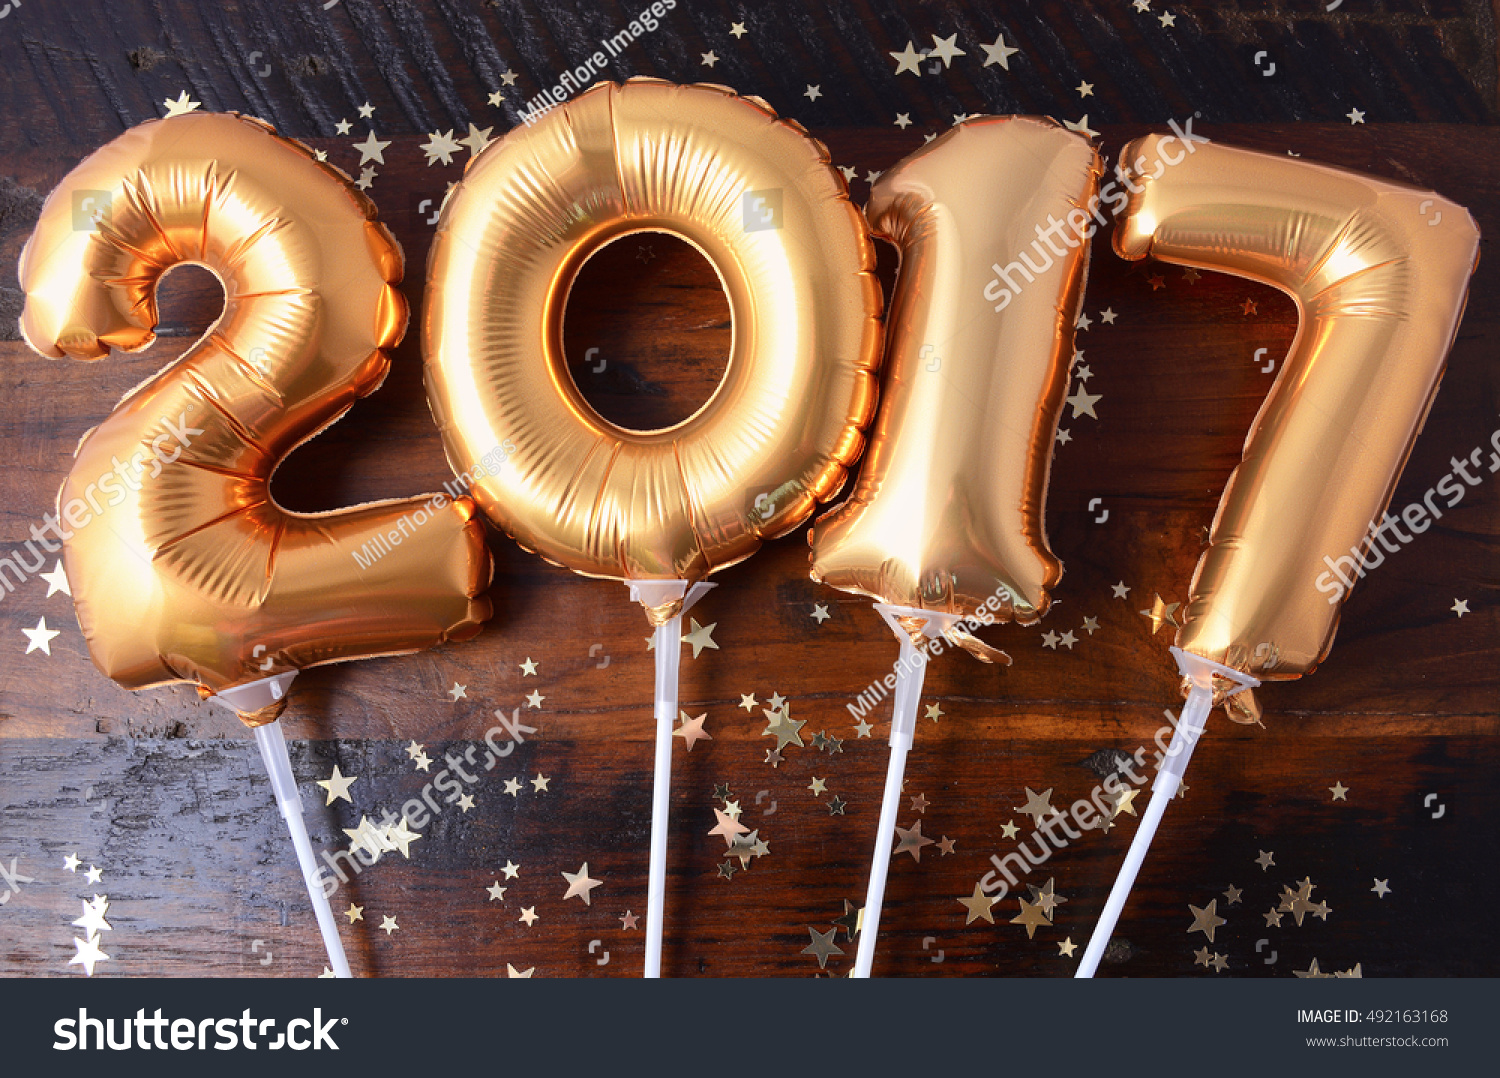 Happy 2017 gold New Year Balloons with glitter stars on dark wood table background.  #492163168